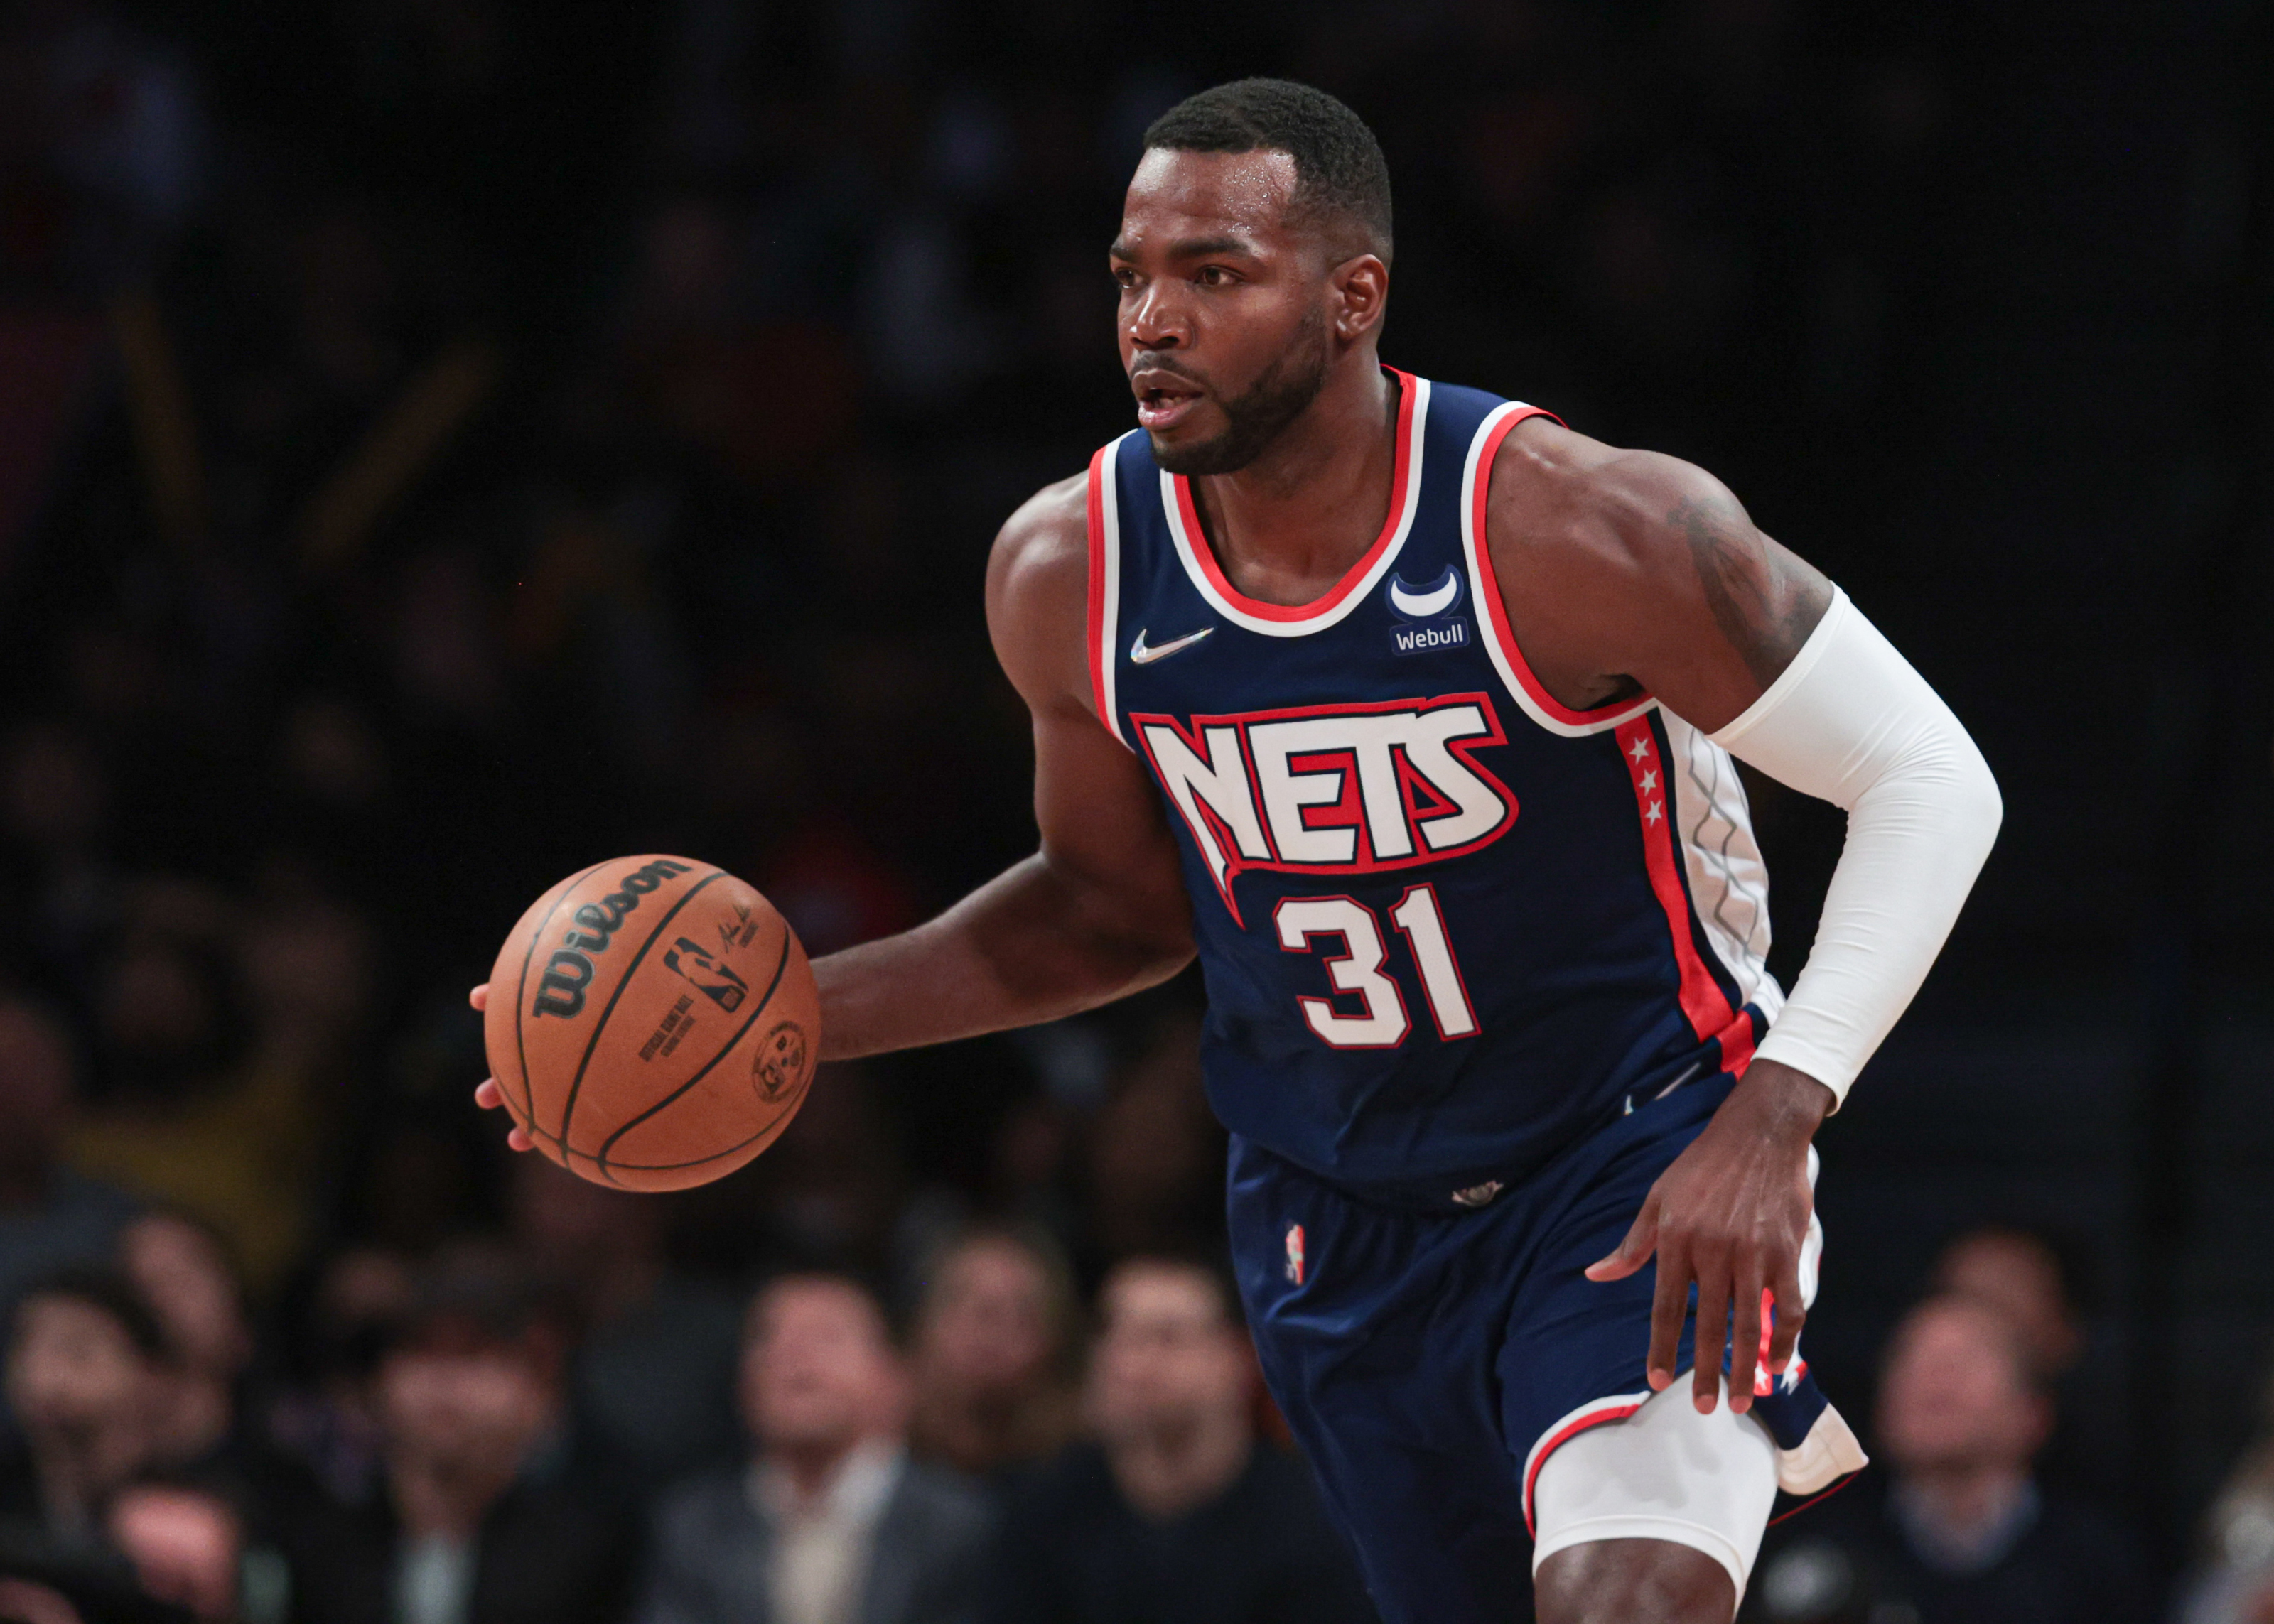 Paul Millsap happy to join Sixers after tough Brooklyn Nets stint